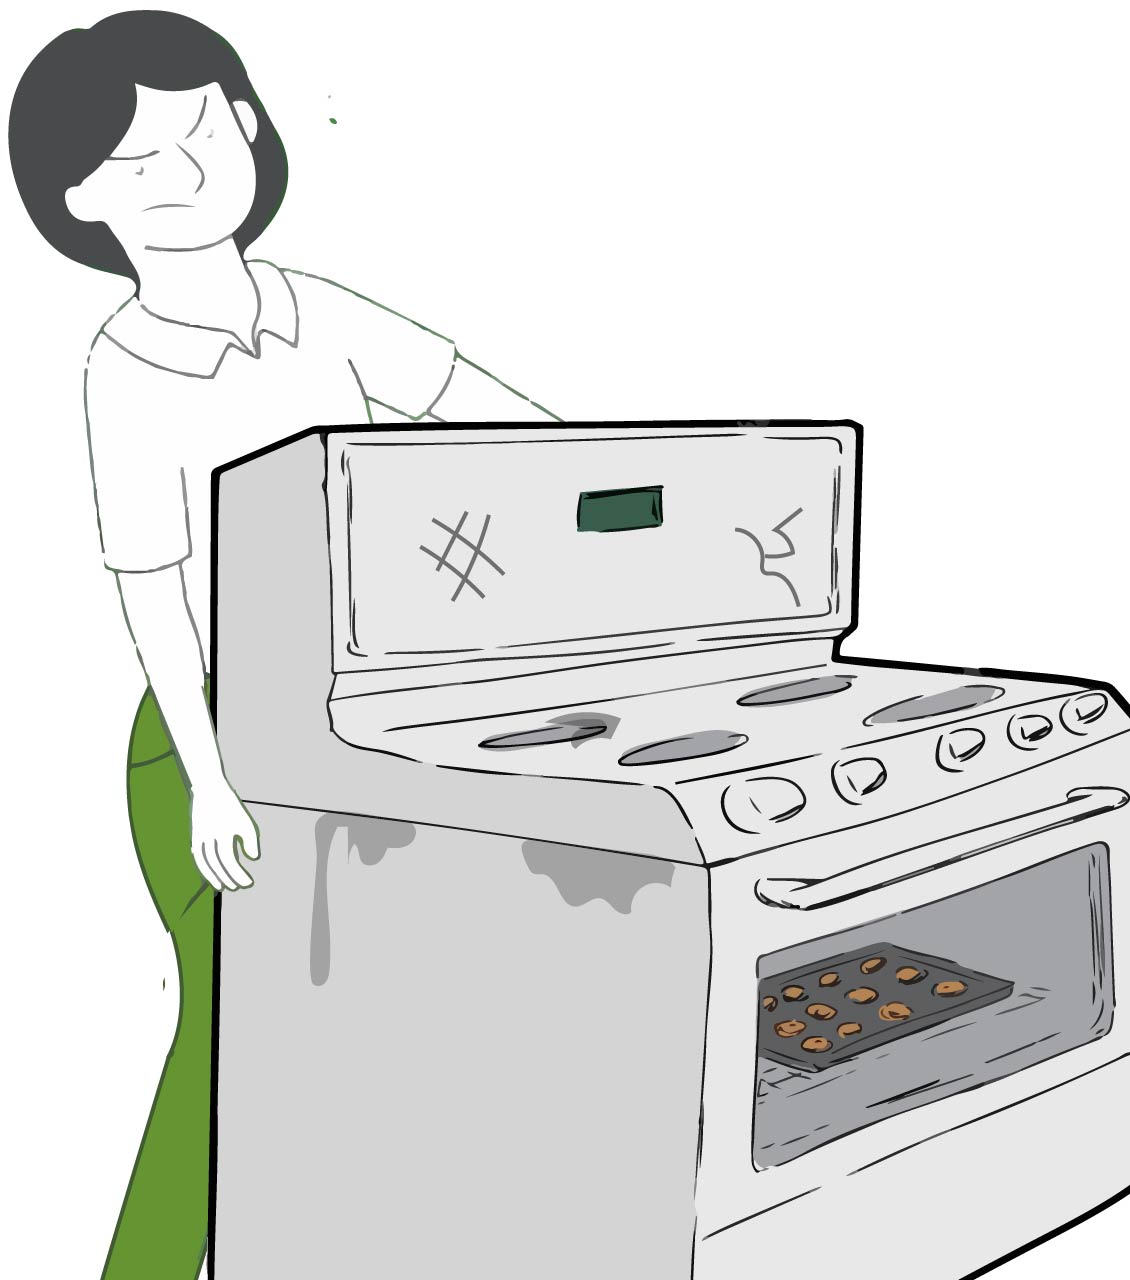 Tallahassee oven removal services